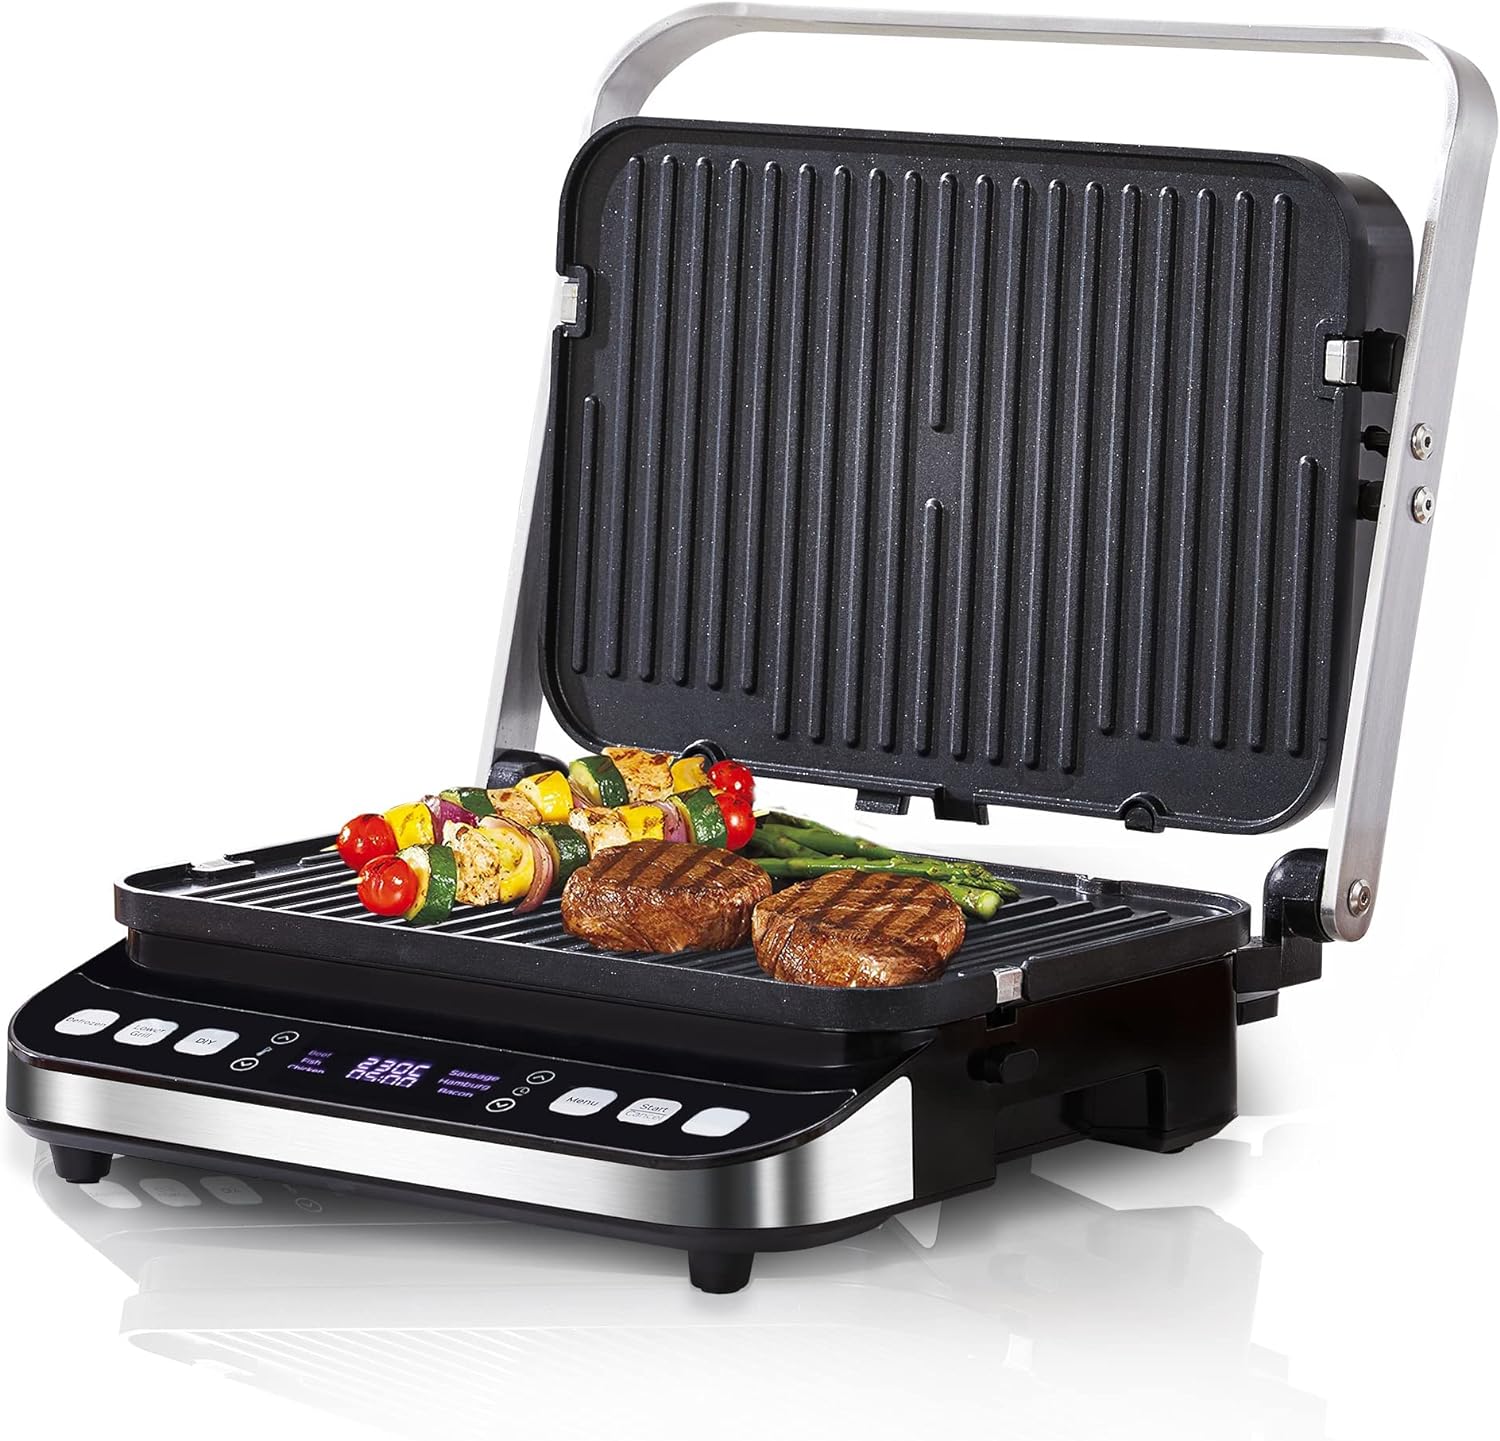 Contact Grill, Sandwich Maker, Waffle Iron, 180° Double-Sided Optical Grill, Indoor Electric Grill, 6 Automatic Programmes, Intuitive Sensor, Touch Display, 2000 W, Grill with 4 Removable Plates